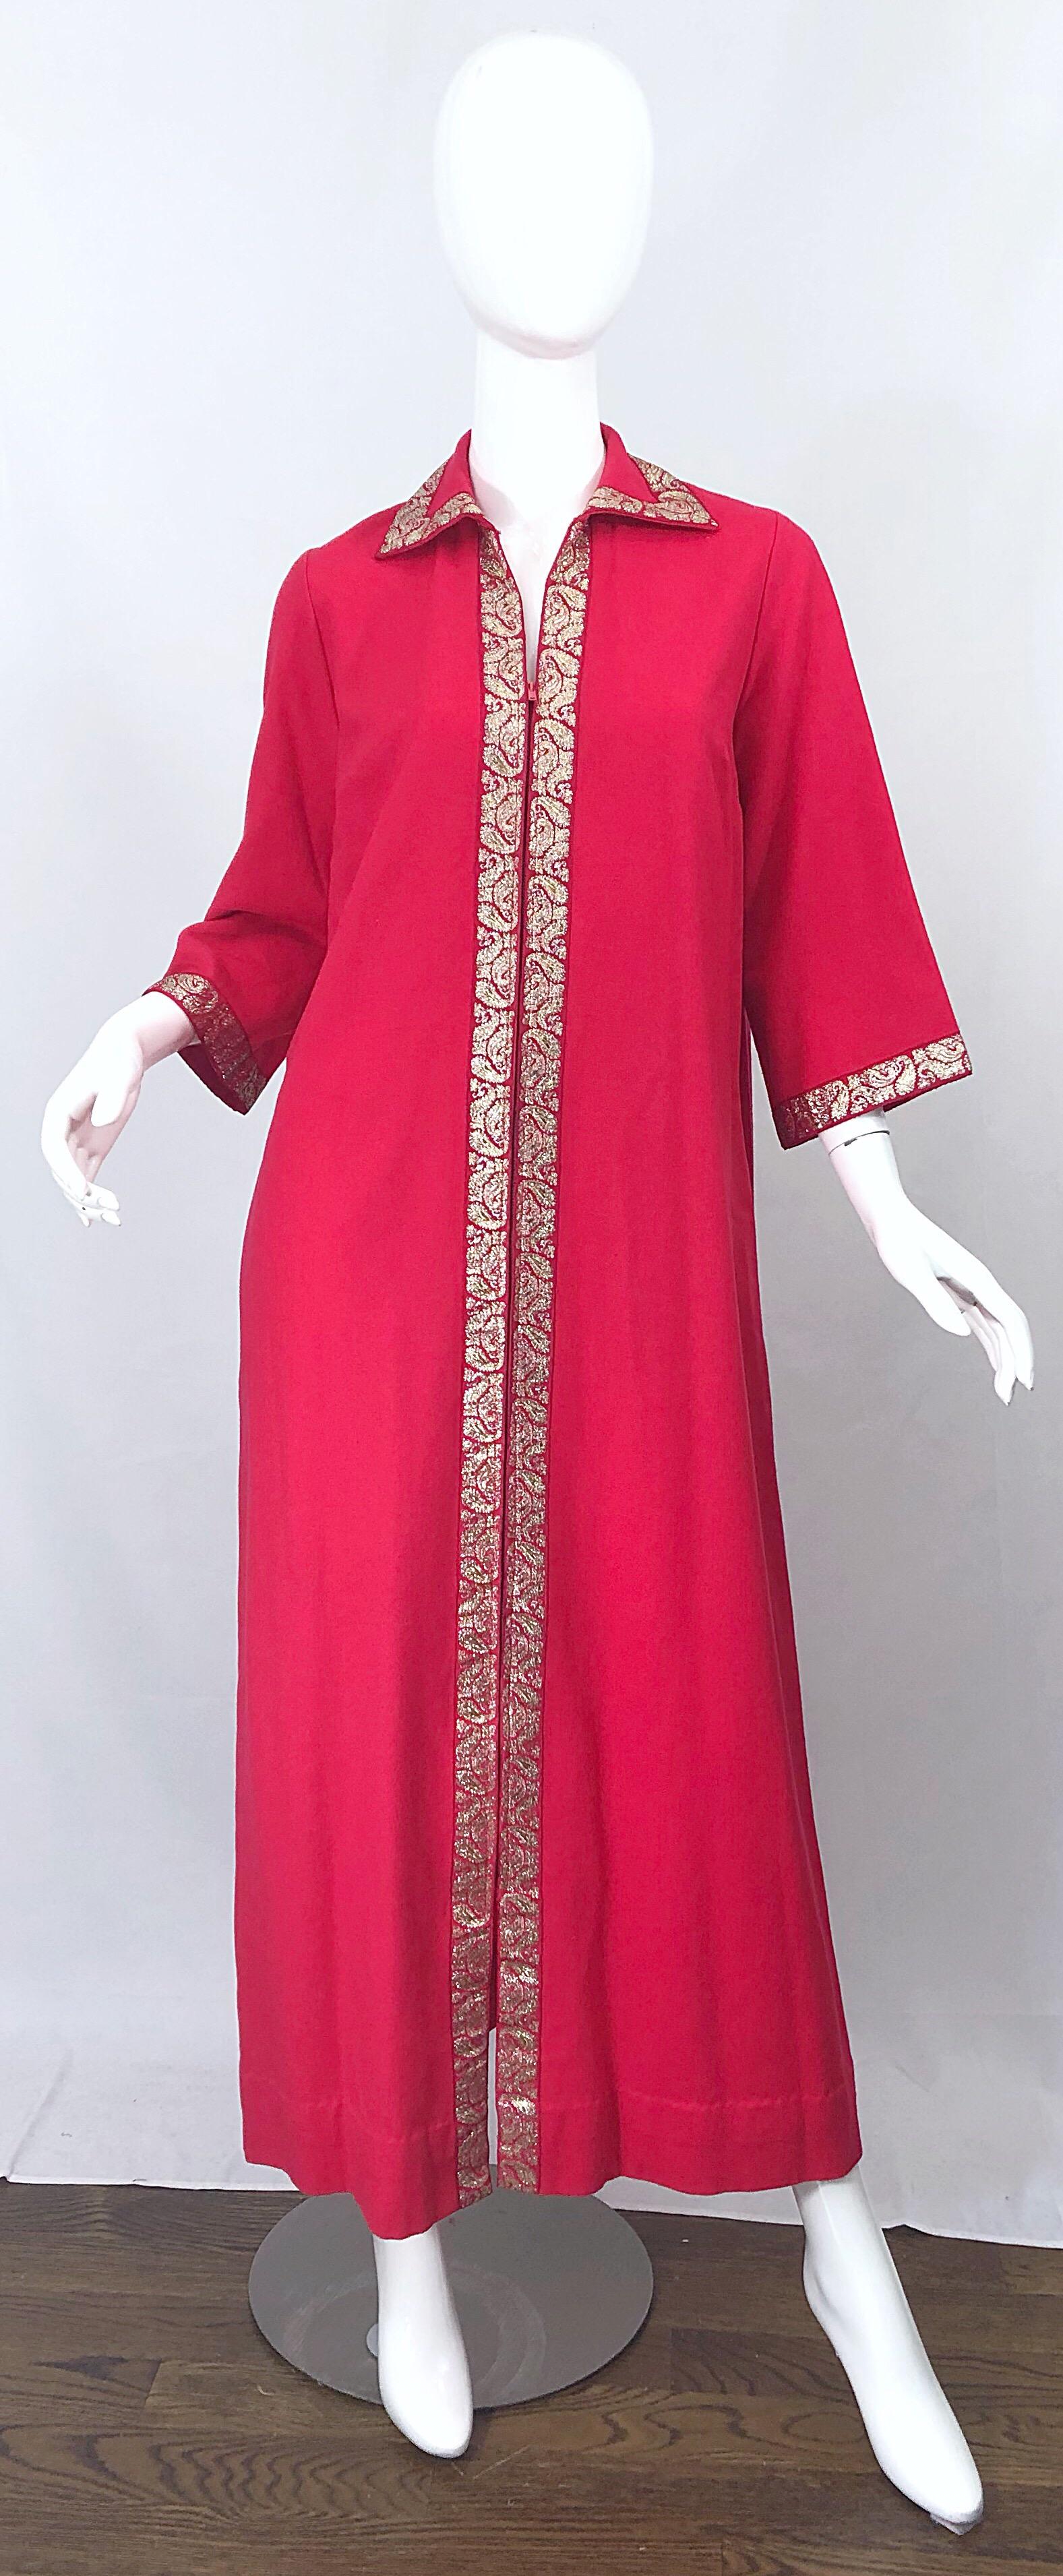 Awesome vintage early 70s MARSHALL FIELDS raspberry pink and gold 3/4 bell sleeve caftan maxi dress! Features gold brocade trim. Zipper up the front with hook-and-eye closure. POCKETS at each side of the hips. In great condition. Made in